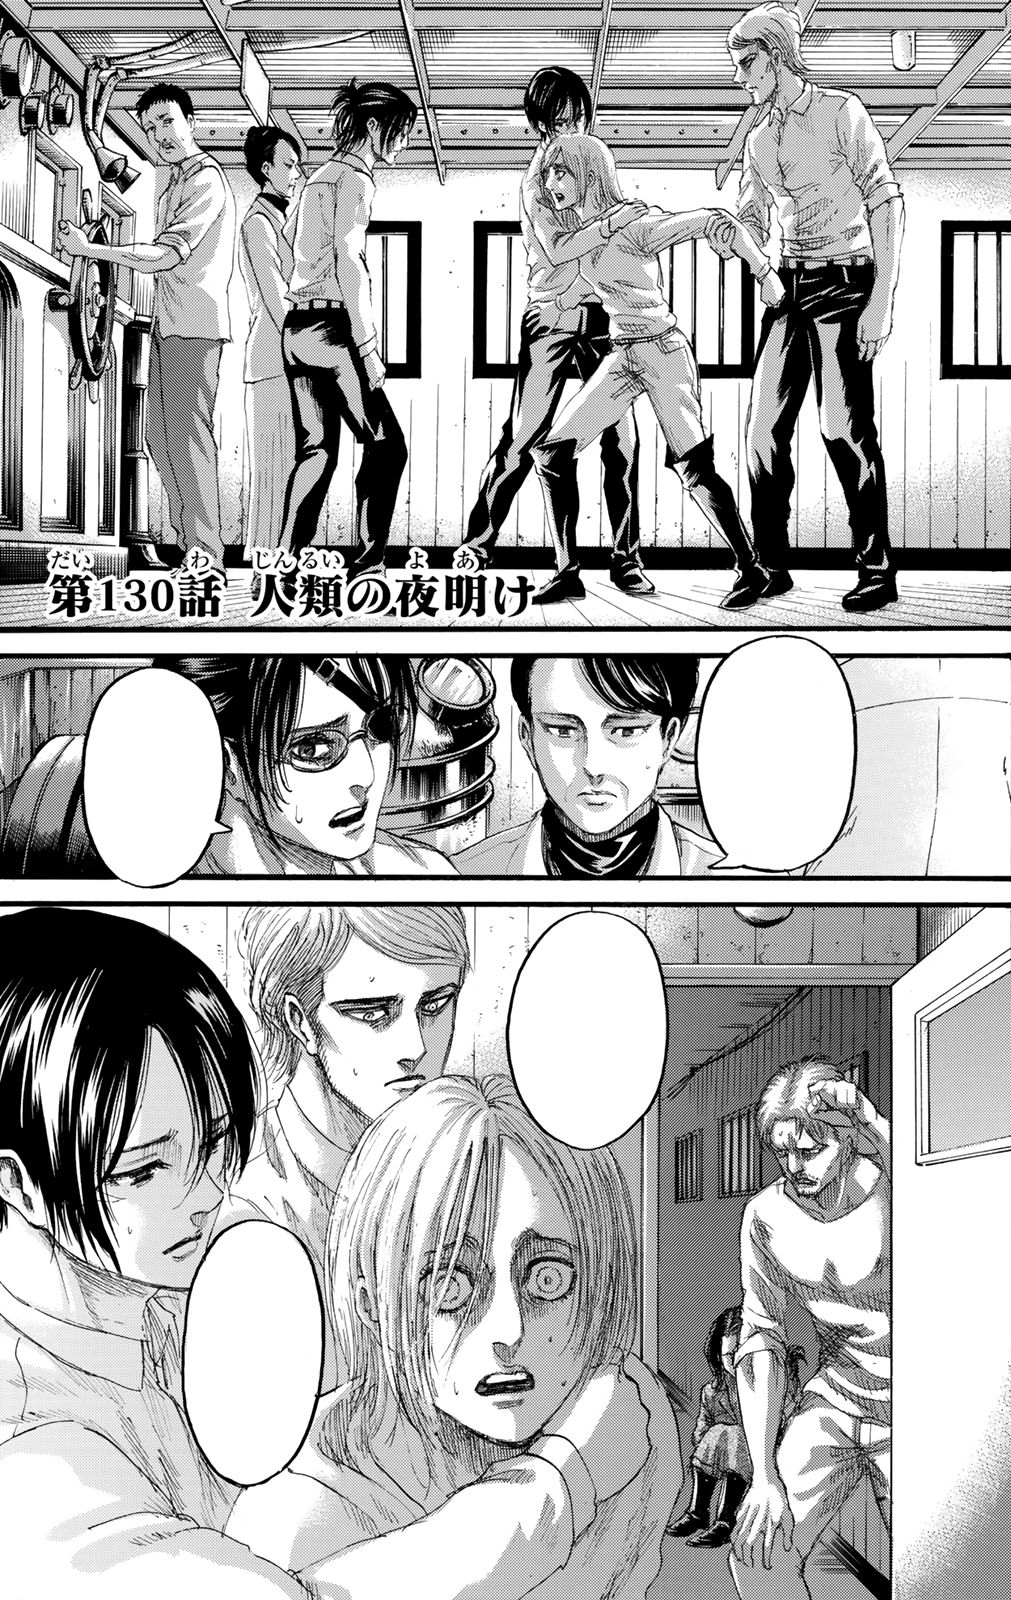 The Dawn Of Humanity Attack On Titan Wiki Fandom This chapter was bittersweet af. the dawn of humanity attack on titan